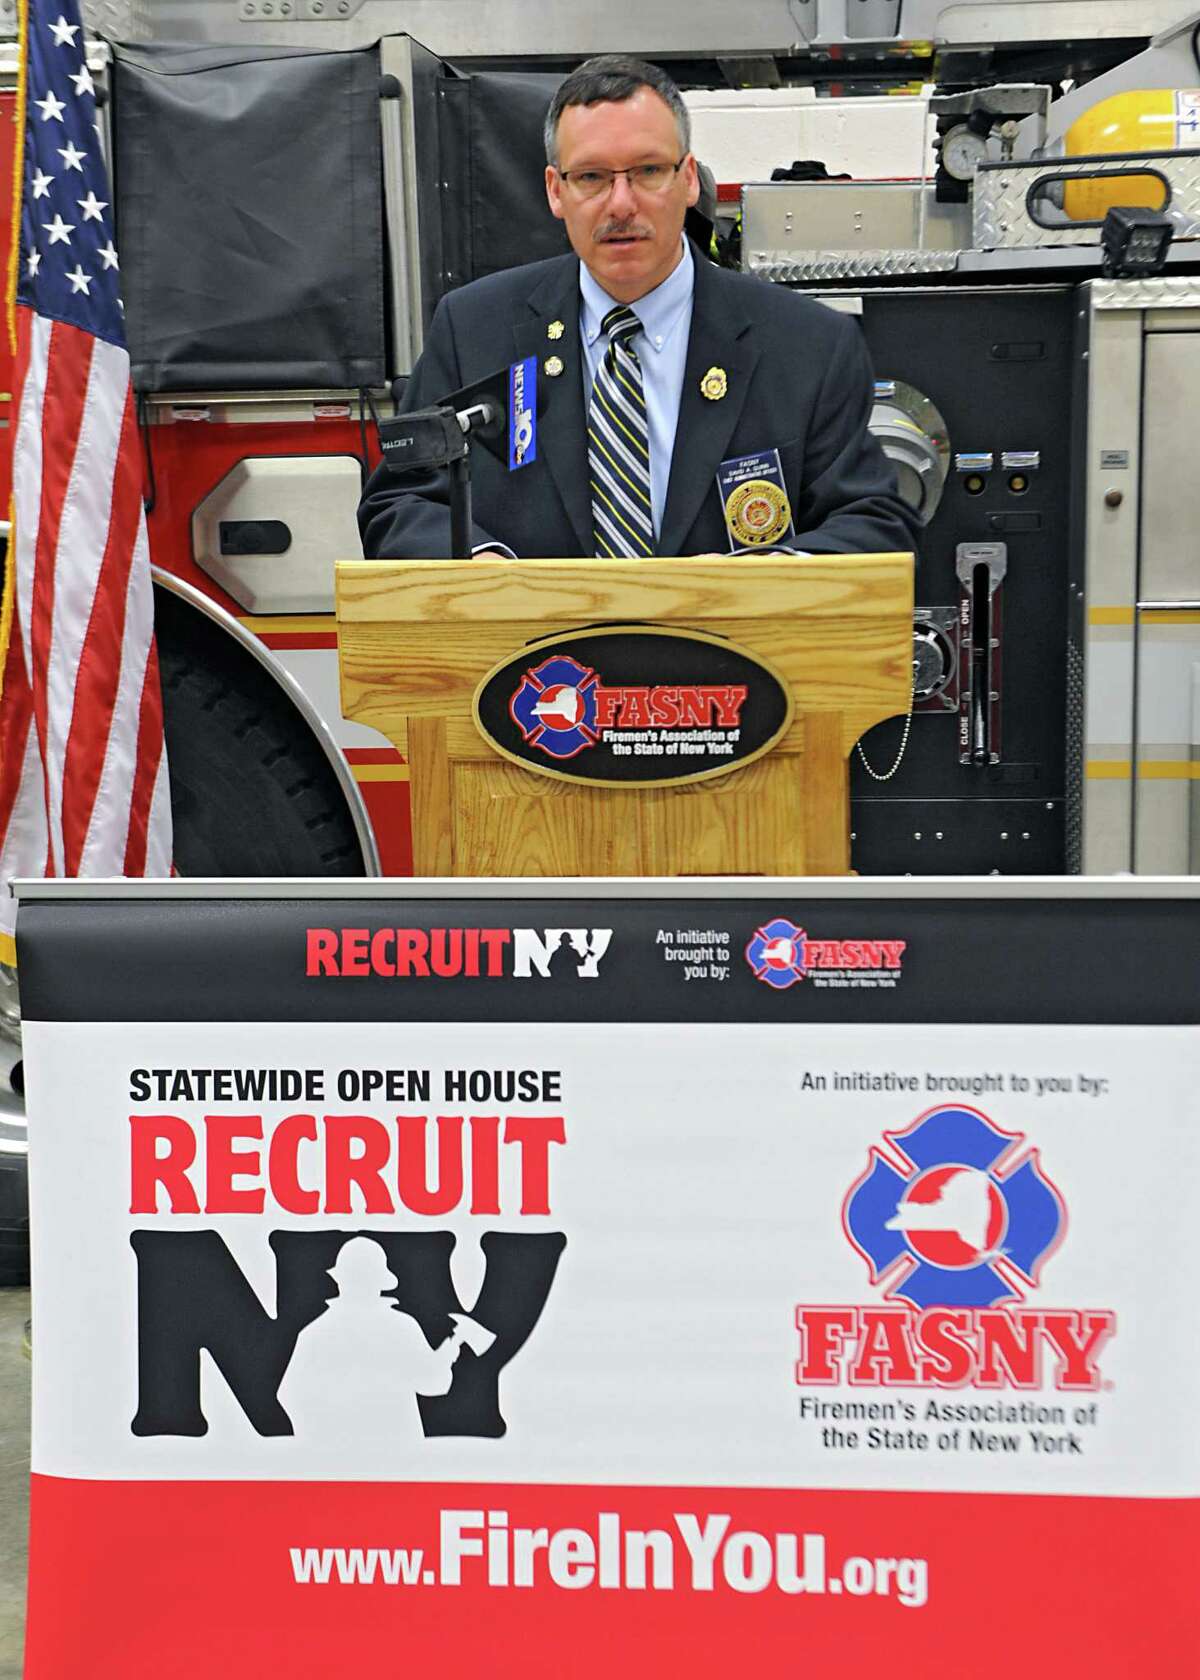 Former Firefighters Association of the State of New York State Chief Administrative Officer David Quinn accused the organization of firing him in 2019 after he reported various policy violations involving credit card use and grant payments. A judge recently ruled the organization must pay him more than $369,000 in severance. (Lori Van Buren / Times Union)